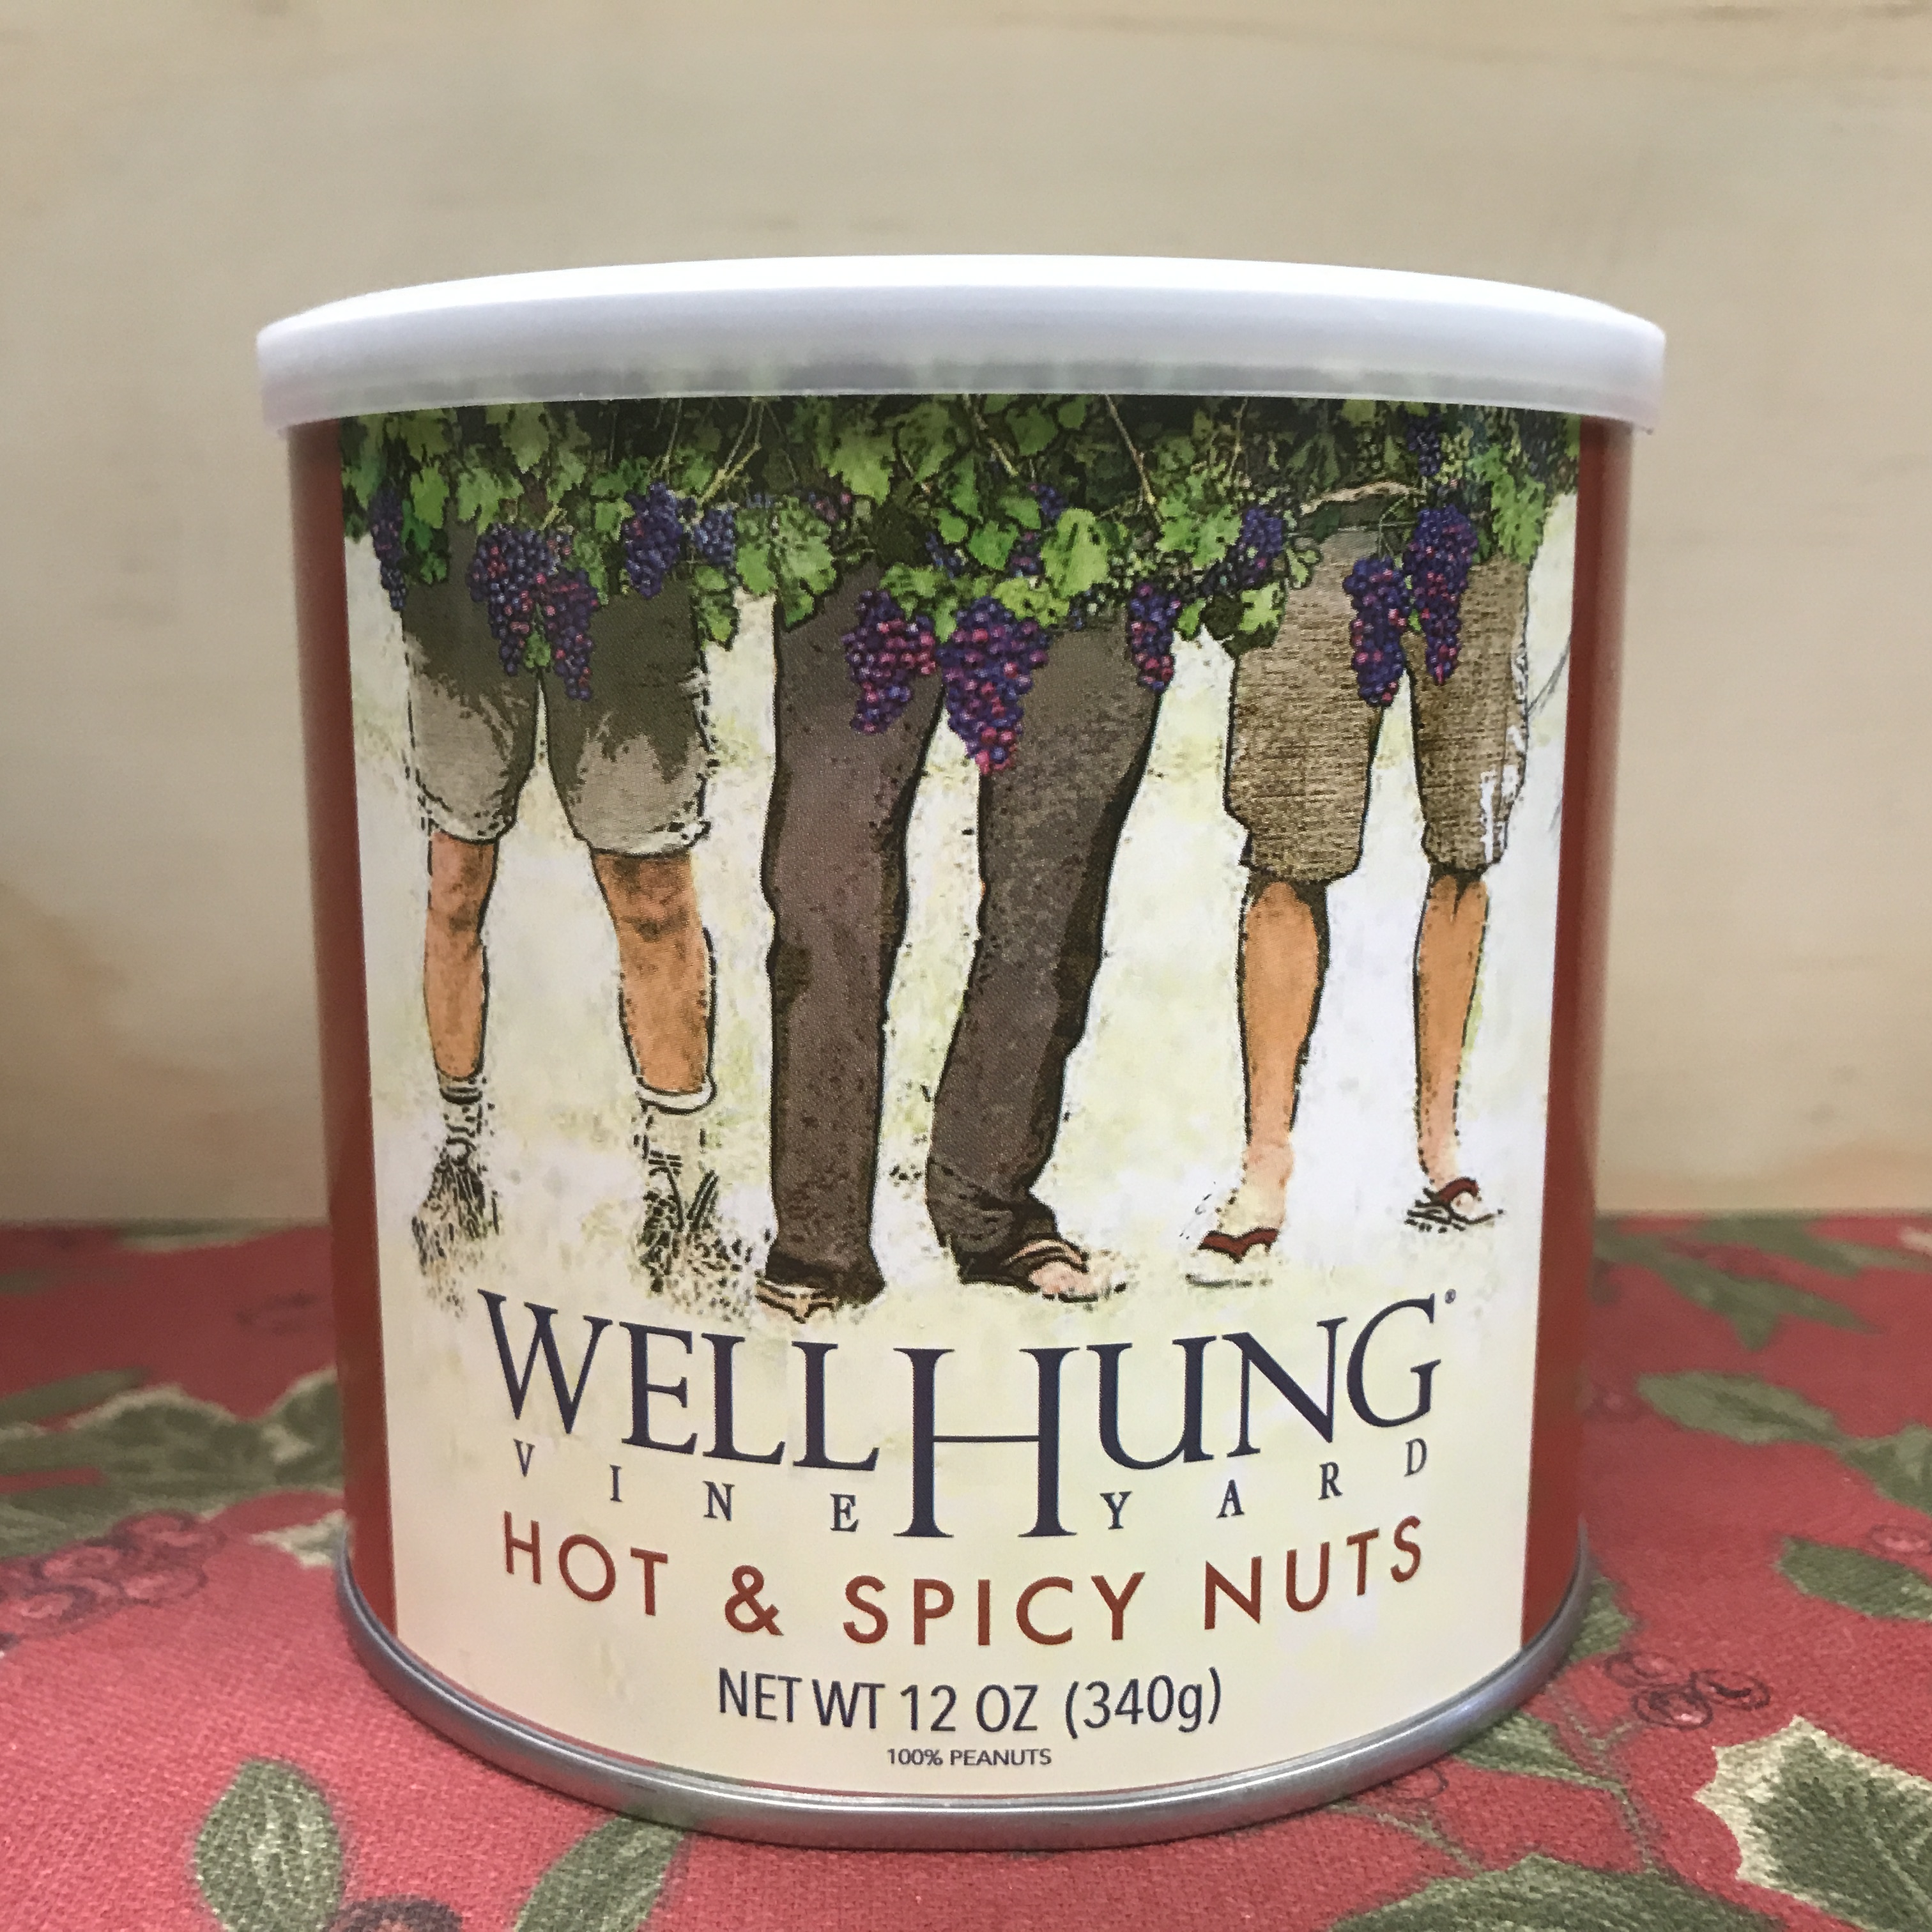 Well Hung Hot & Spicy Nuts